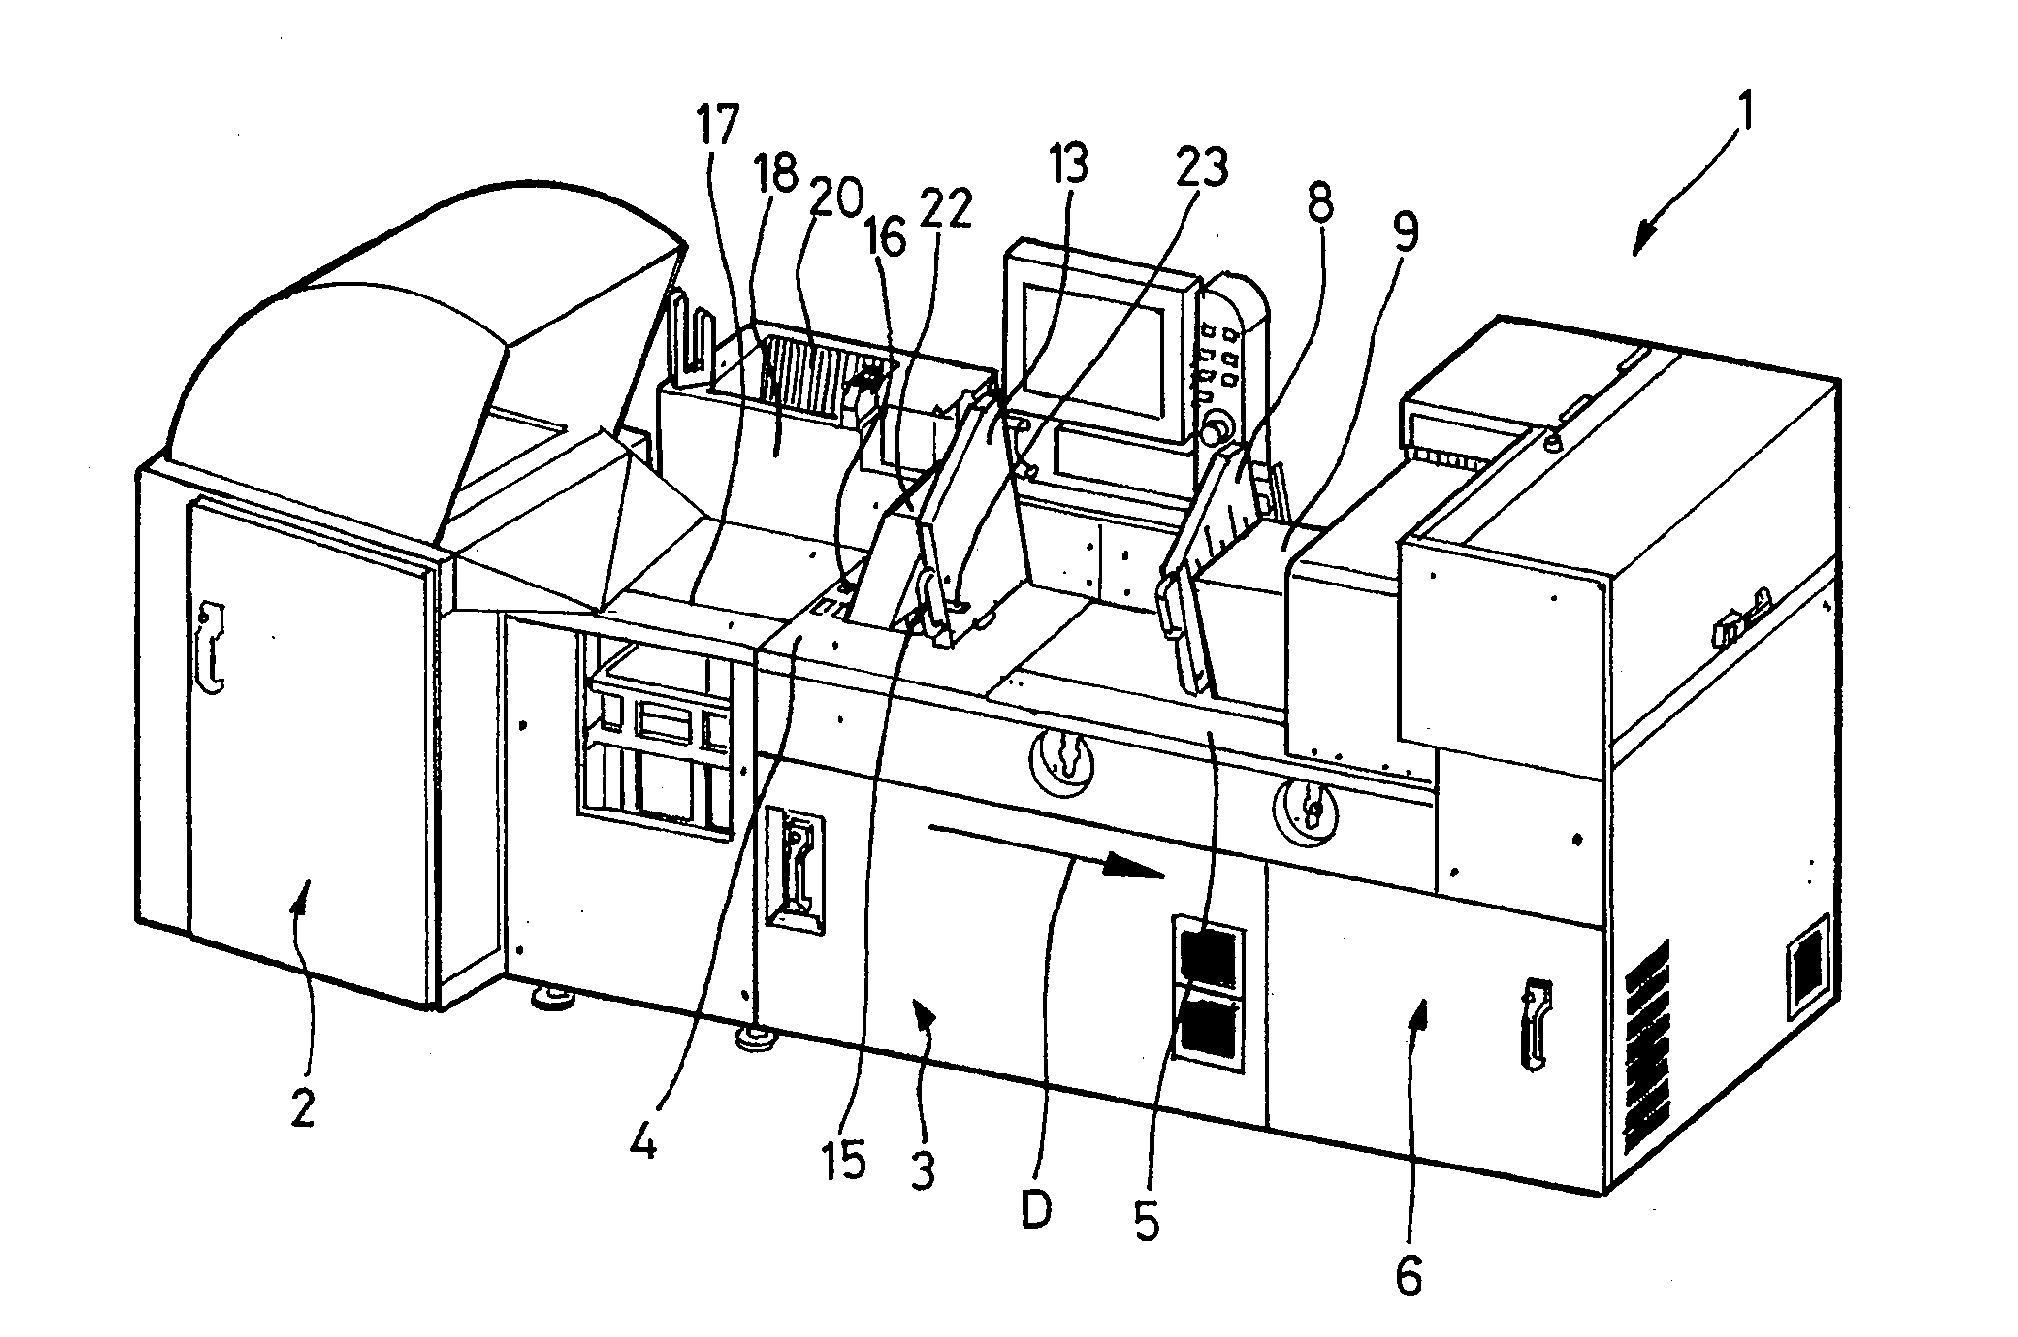 Method of Feeding Unstacker Apparatus For Unstacking Postal Items